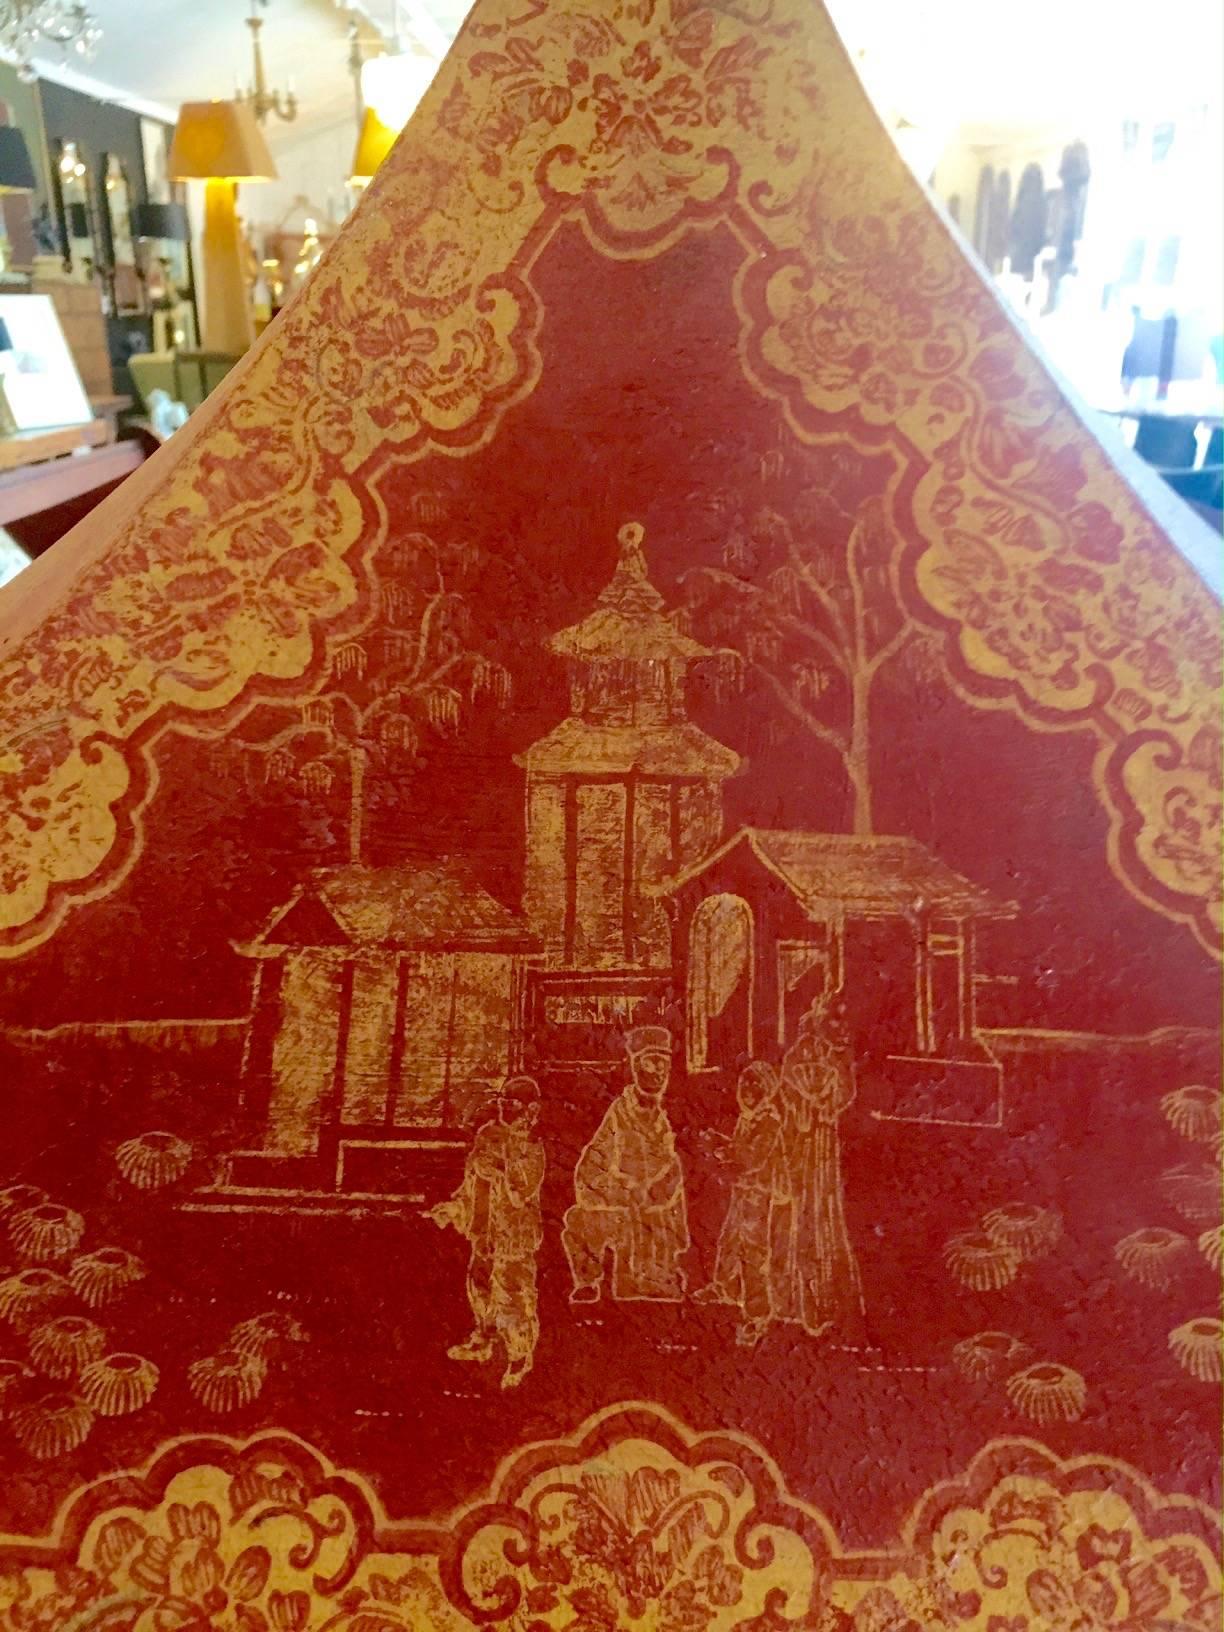 Wonderful metal cabinet to hang or sit on a table having a pagoda design with tent like top and zig zag base all painted red and gold with a chinoiserie design. Interior is painted gold and has pegs for glass shelves. These are included. Some of the